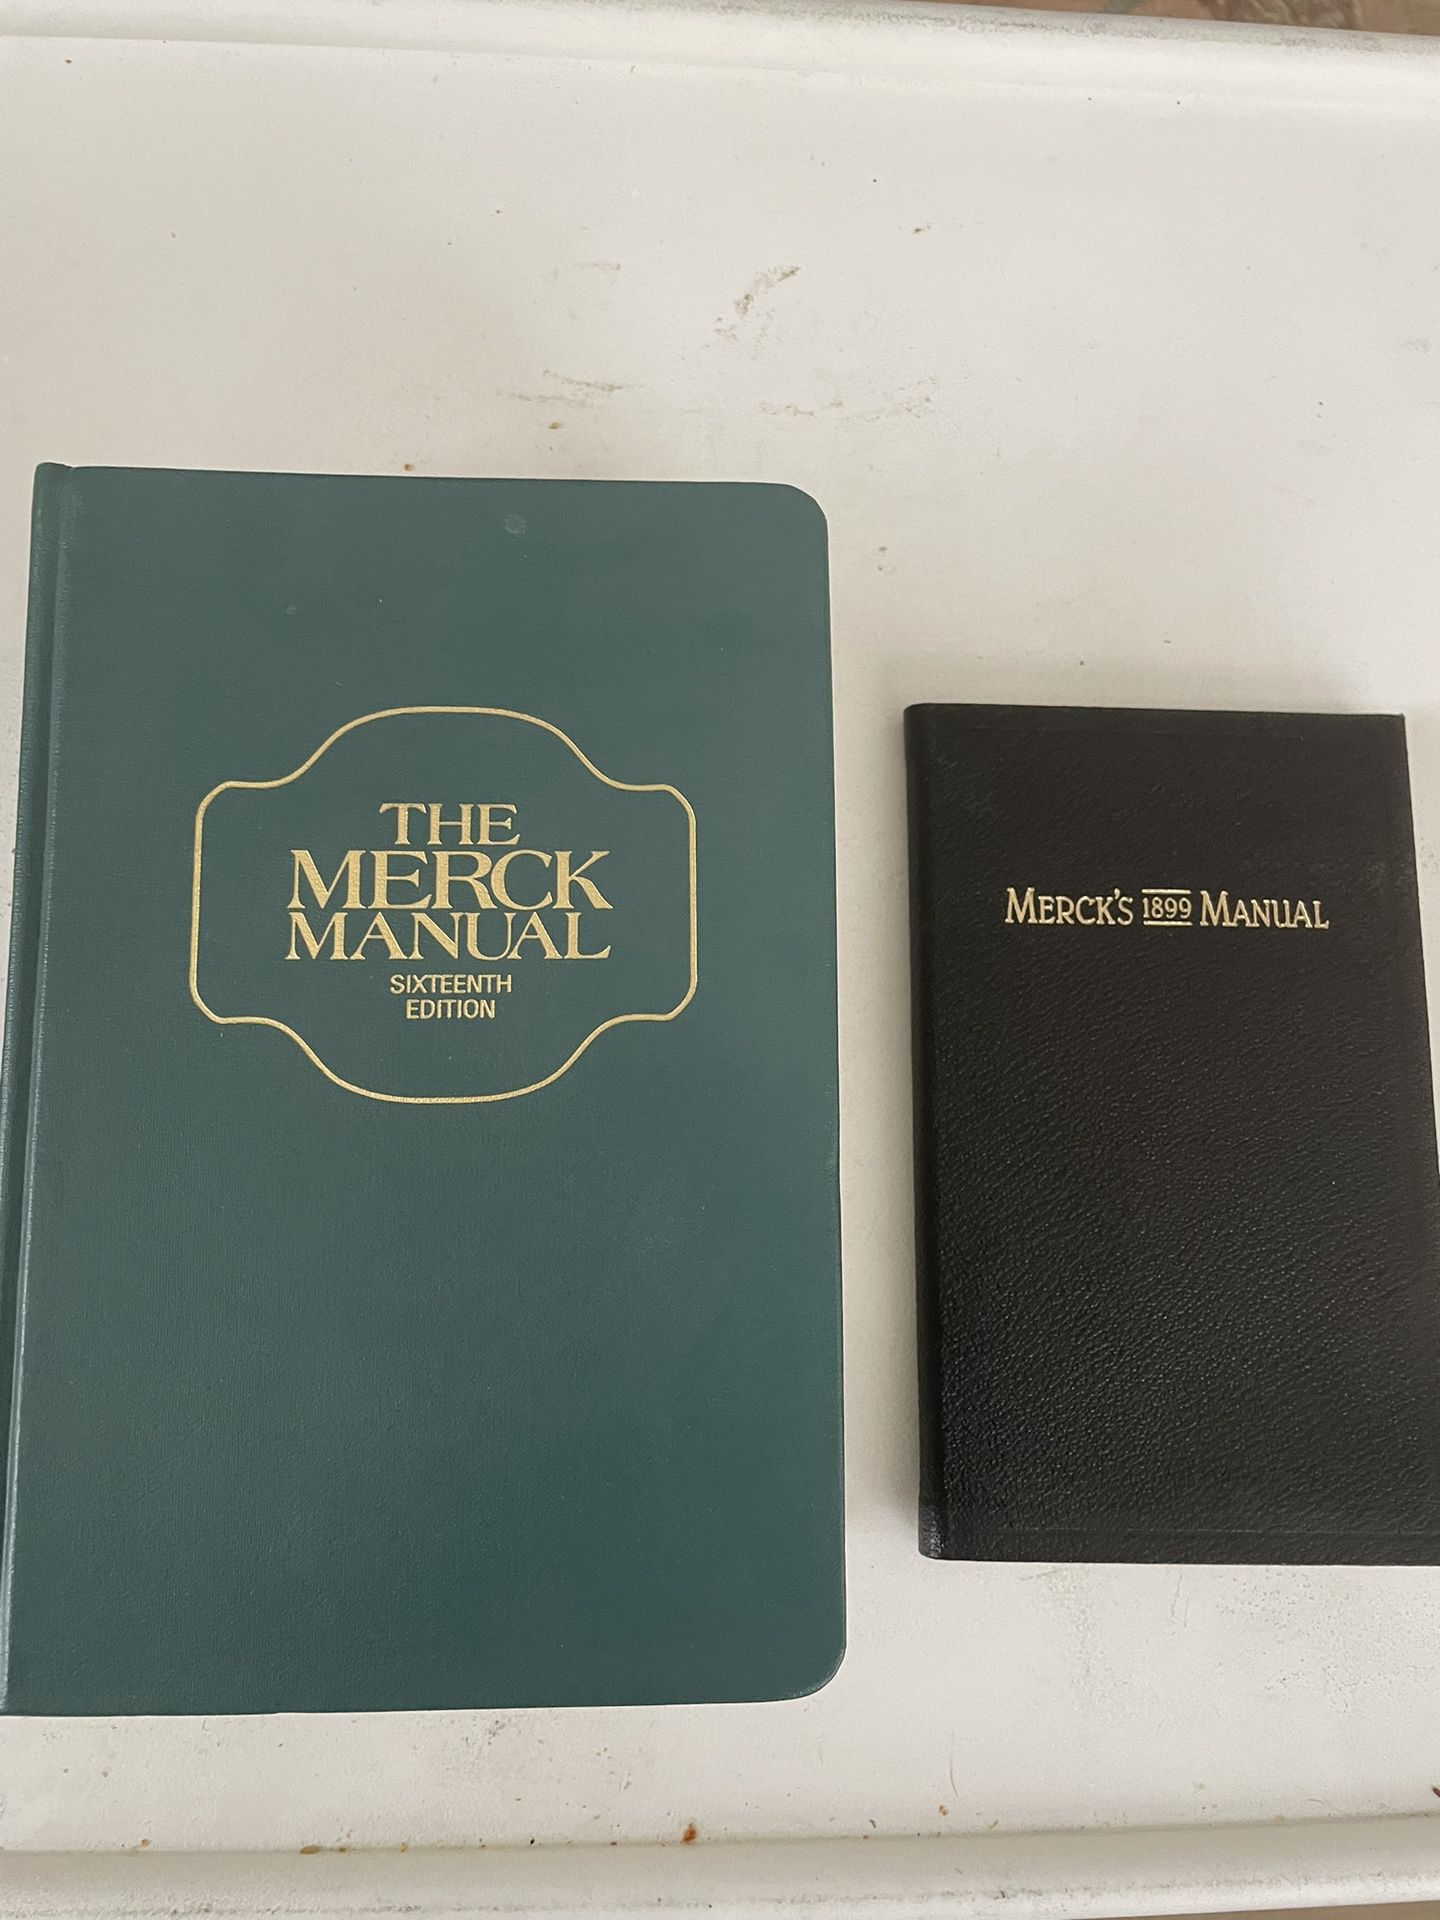 The Merck Manual With 1899 Historical Version